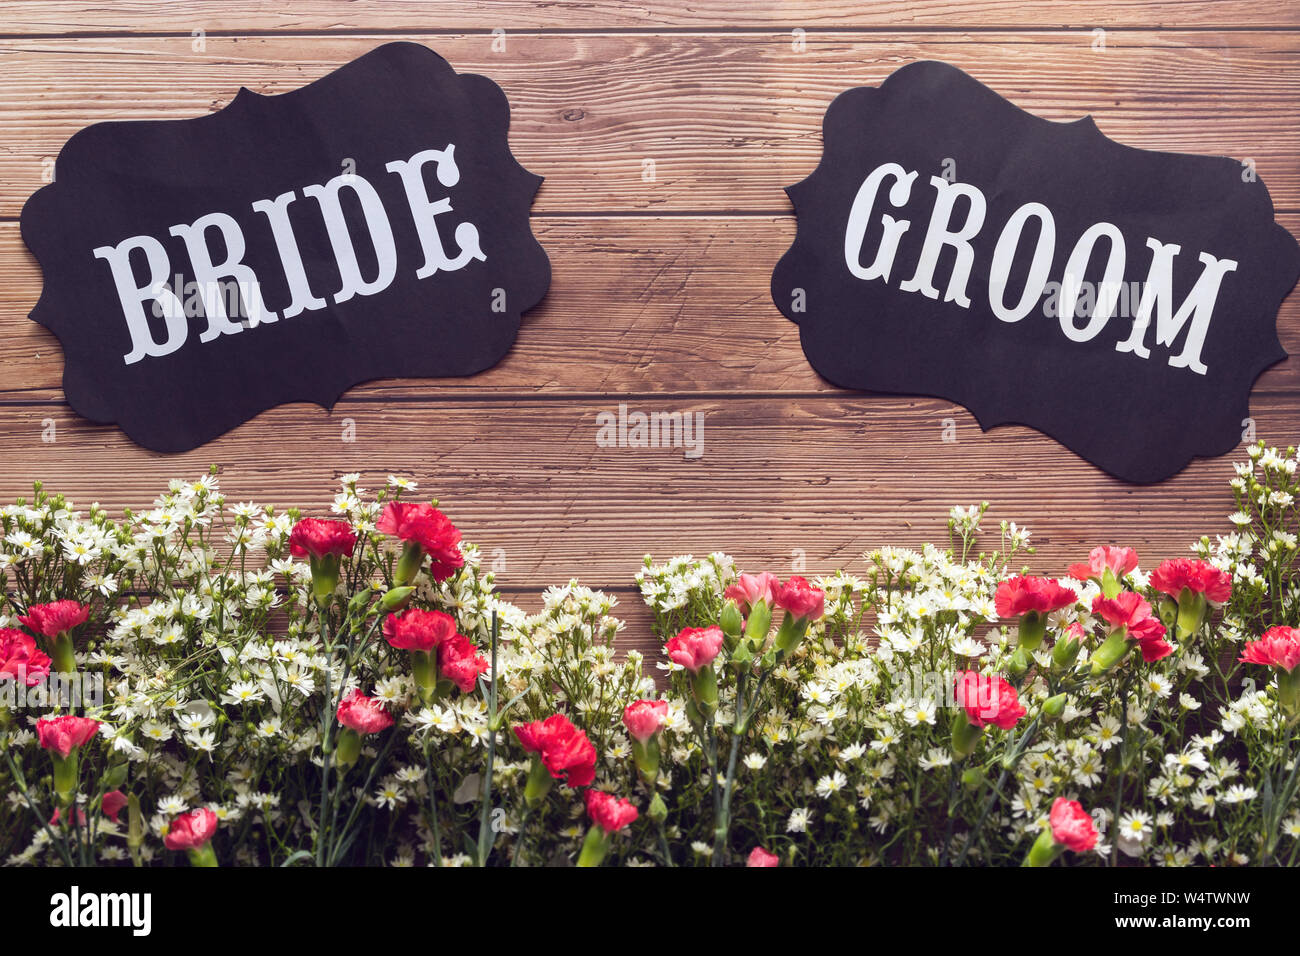 Bride and Groom text sign on wooden background decorated with flower, vintage style. wedding invitation and greeting card Stock Photo